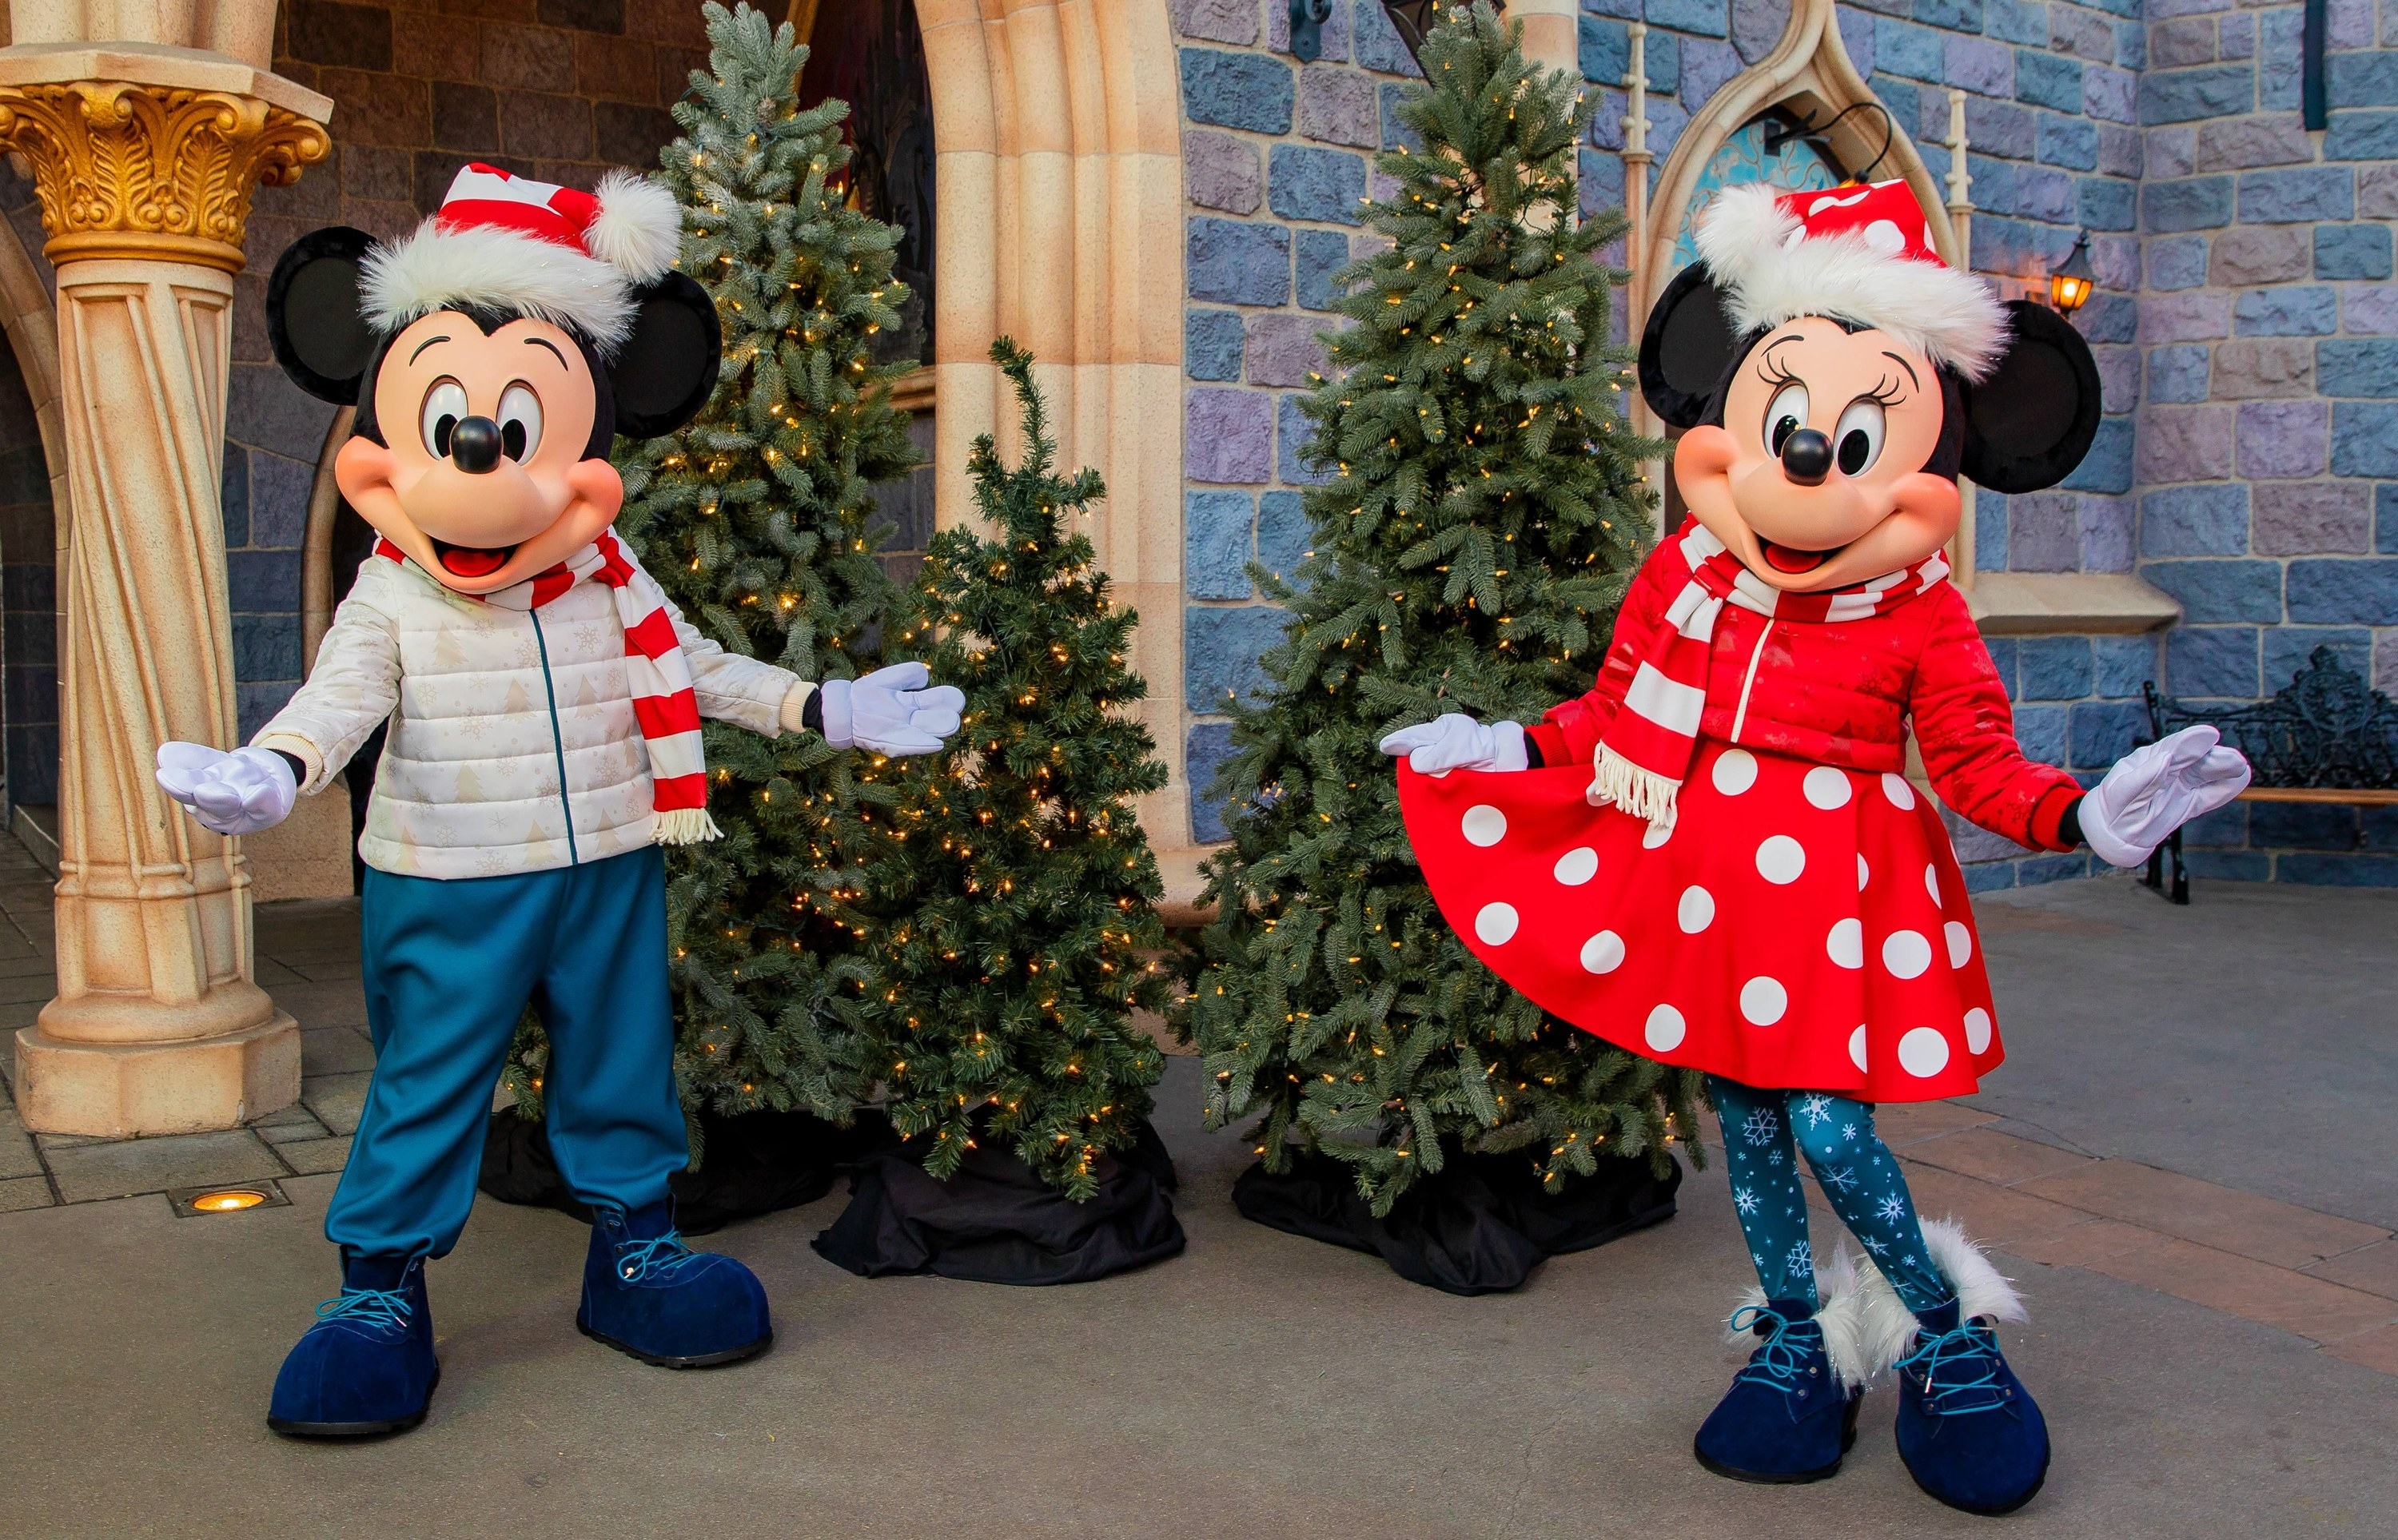 Mickey wearing a white puffy jacket and striped santa hat and Minnie wearing a red puffer jacket and polka dot dress and santa hat